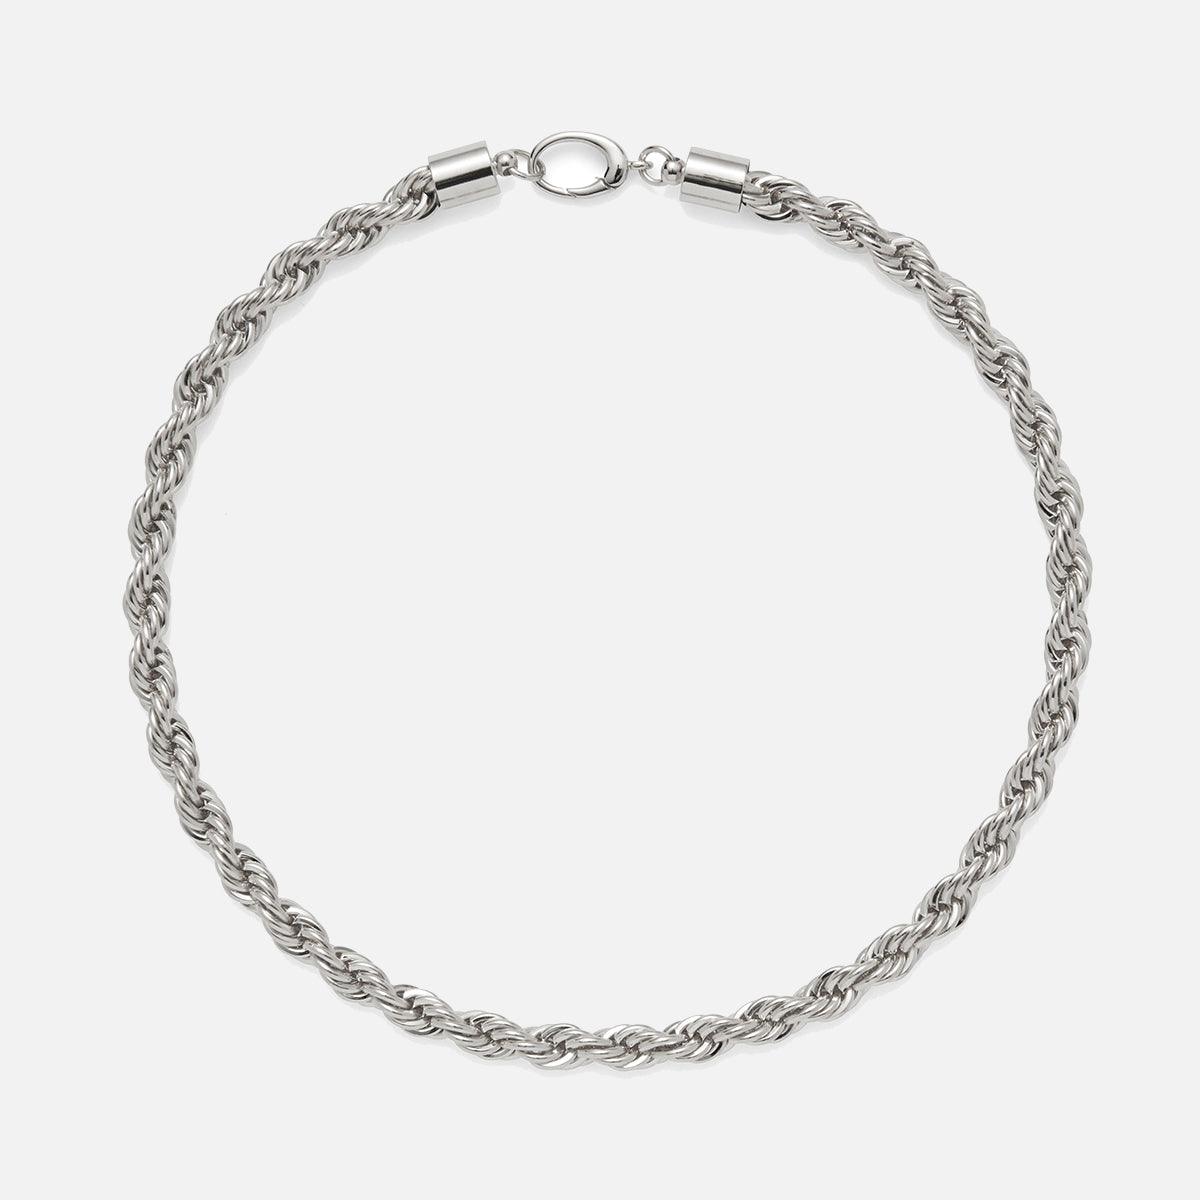 XL Rope Chain Necklace in Silver - At Present